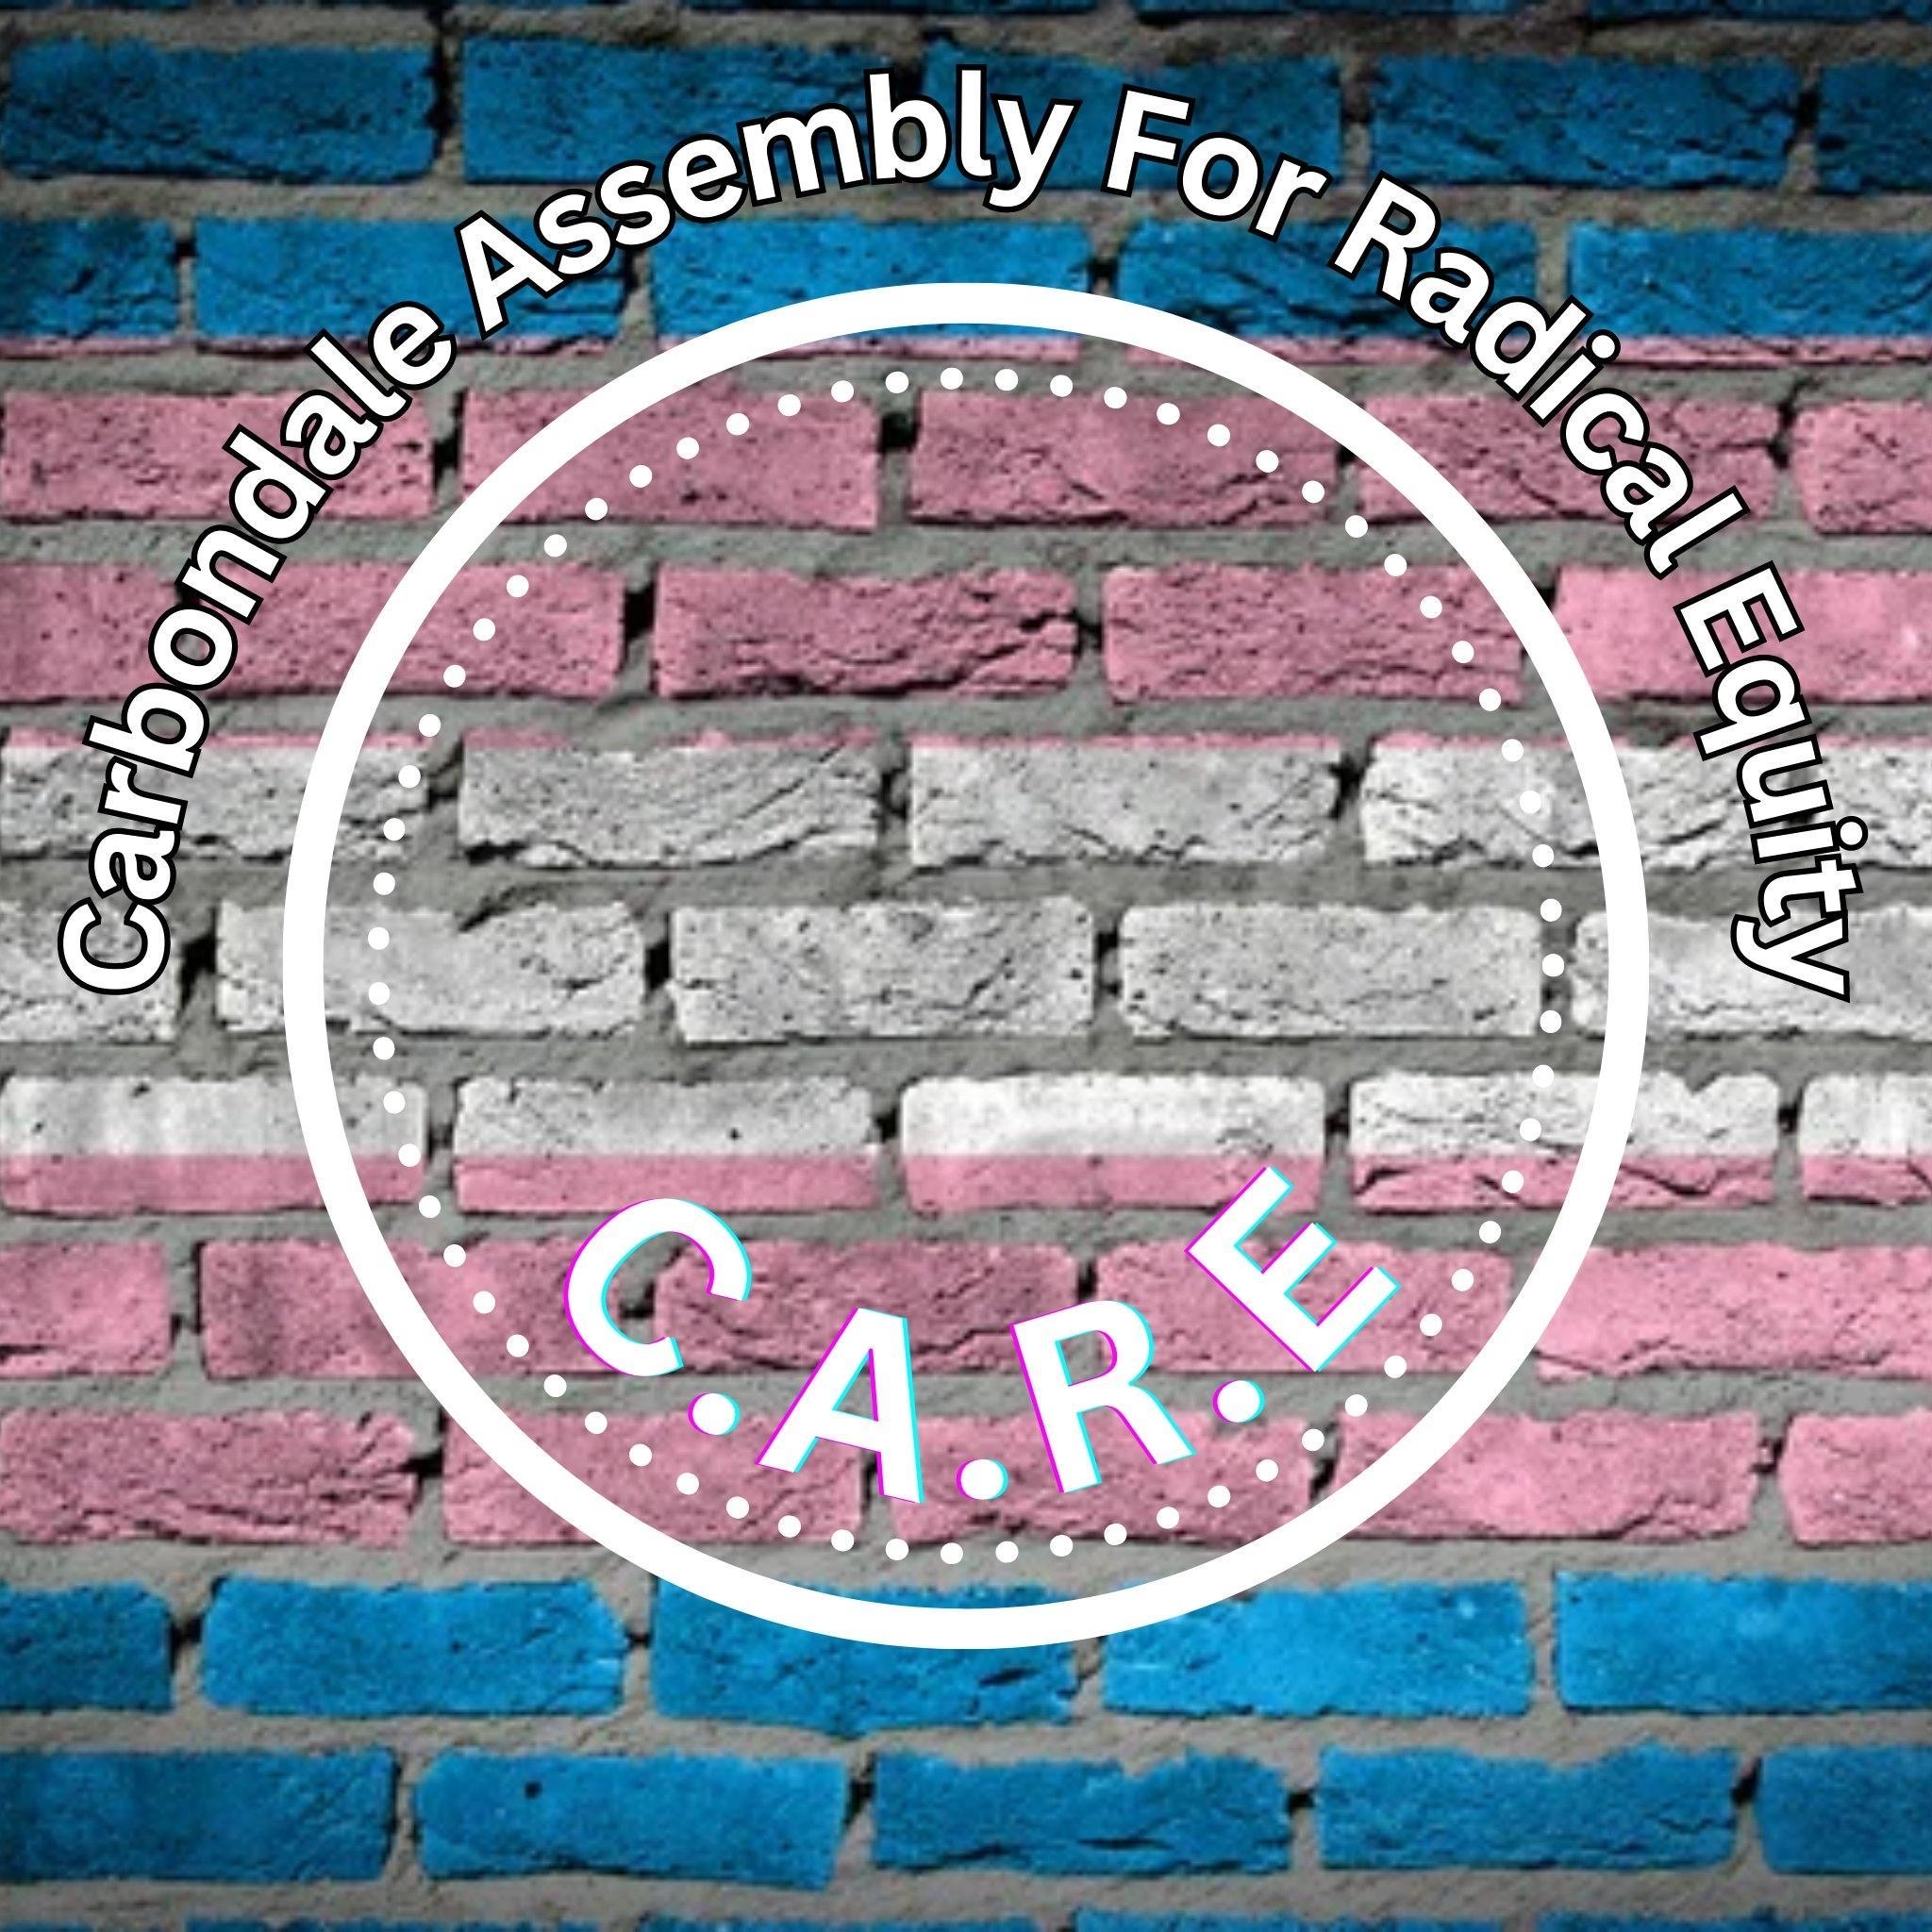 Carbondale Assembly for Radical Equity (CARE) logo in white text on blue, pink, and white brick background